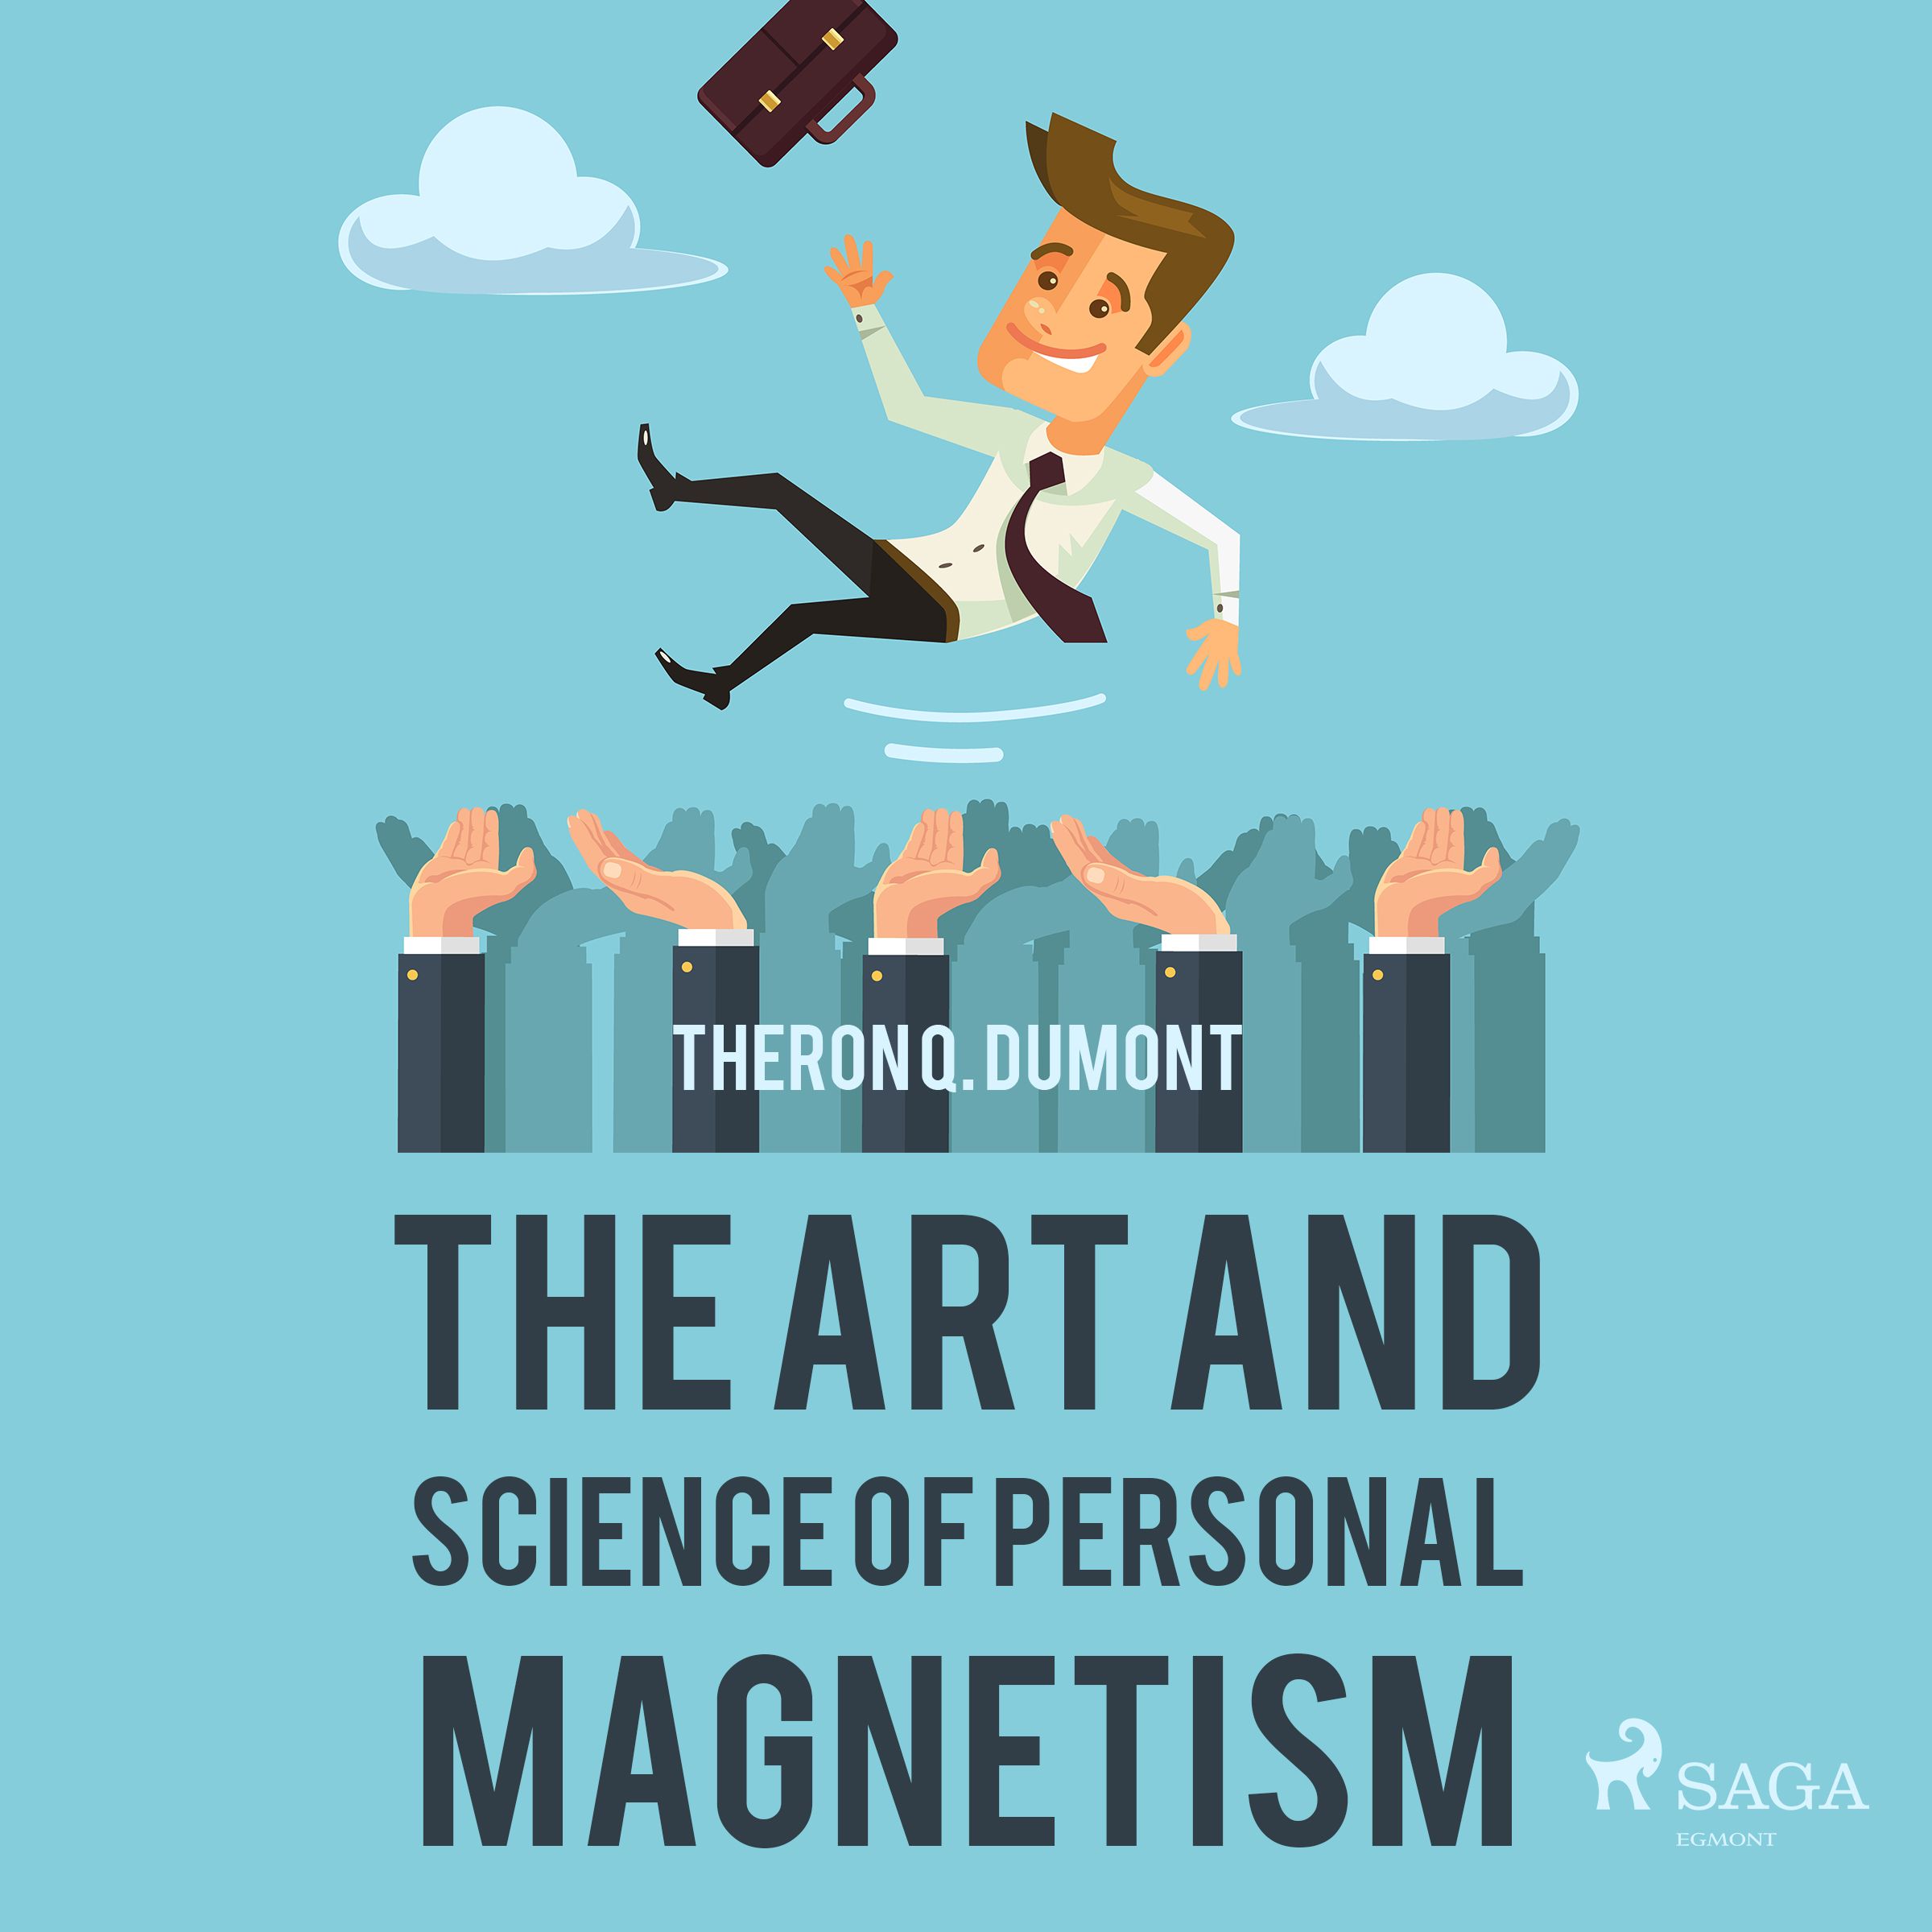 The Art and Science of Personal Magnetism, ljudbok av Theron Q. Dumont